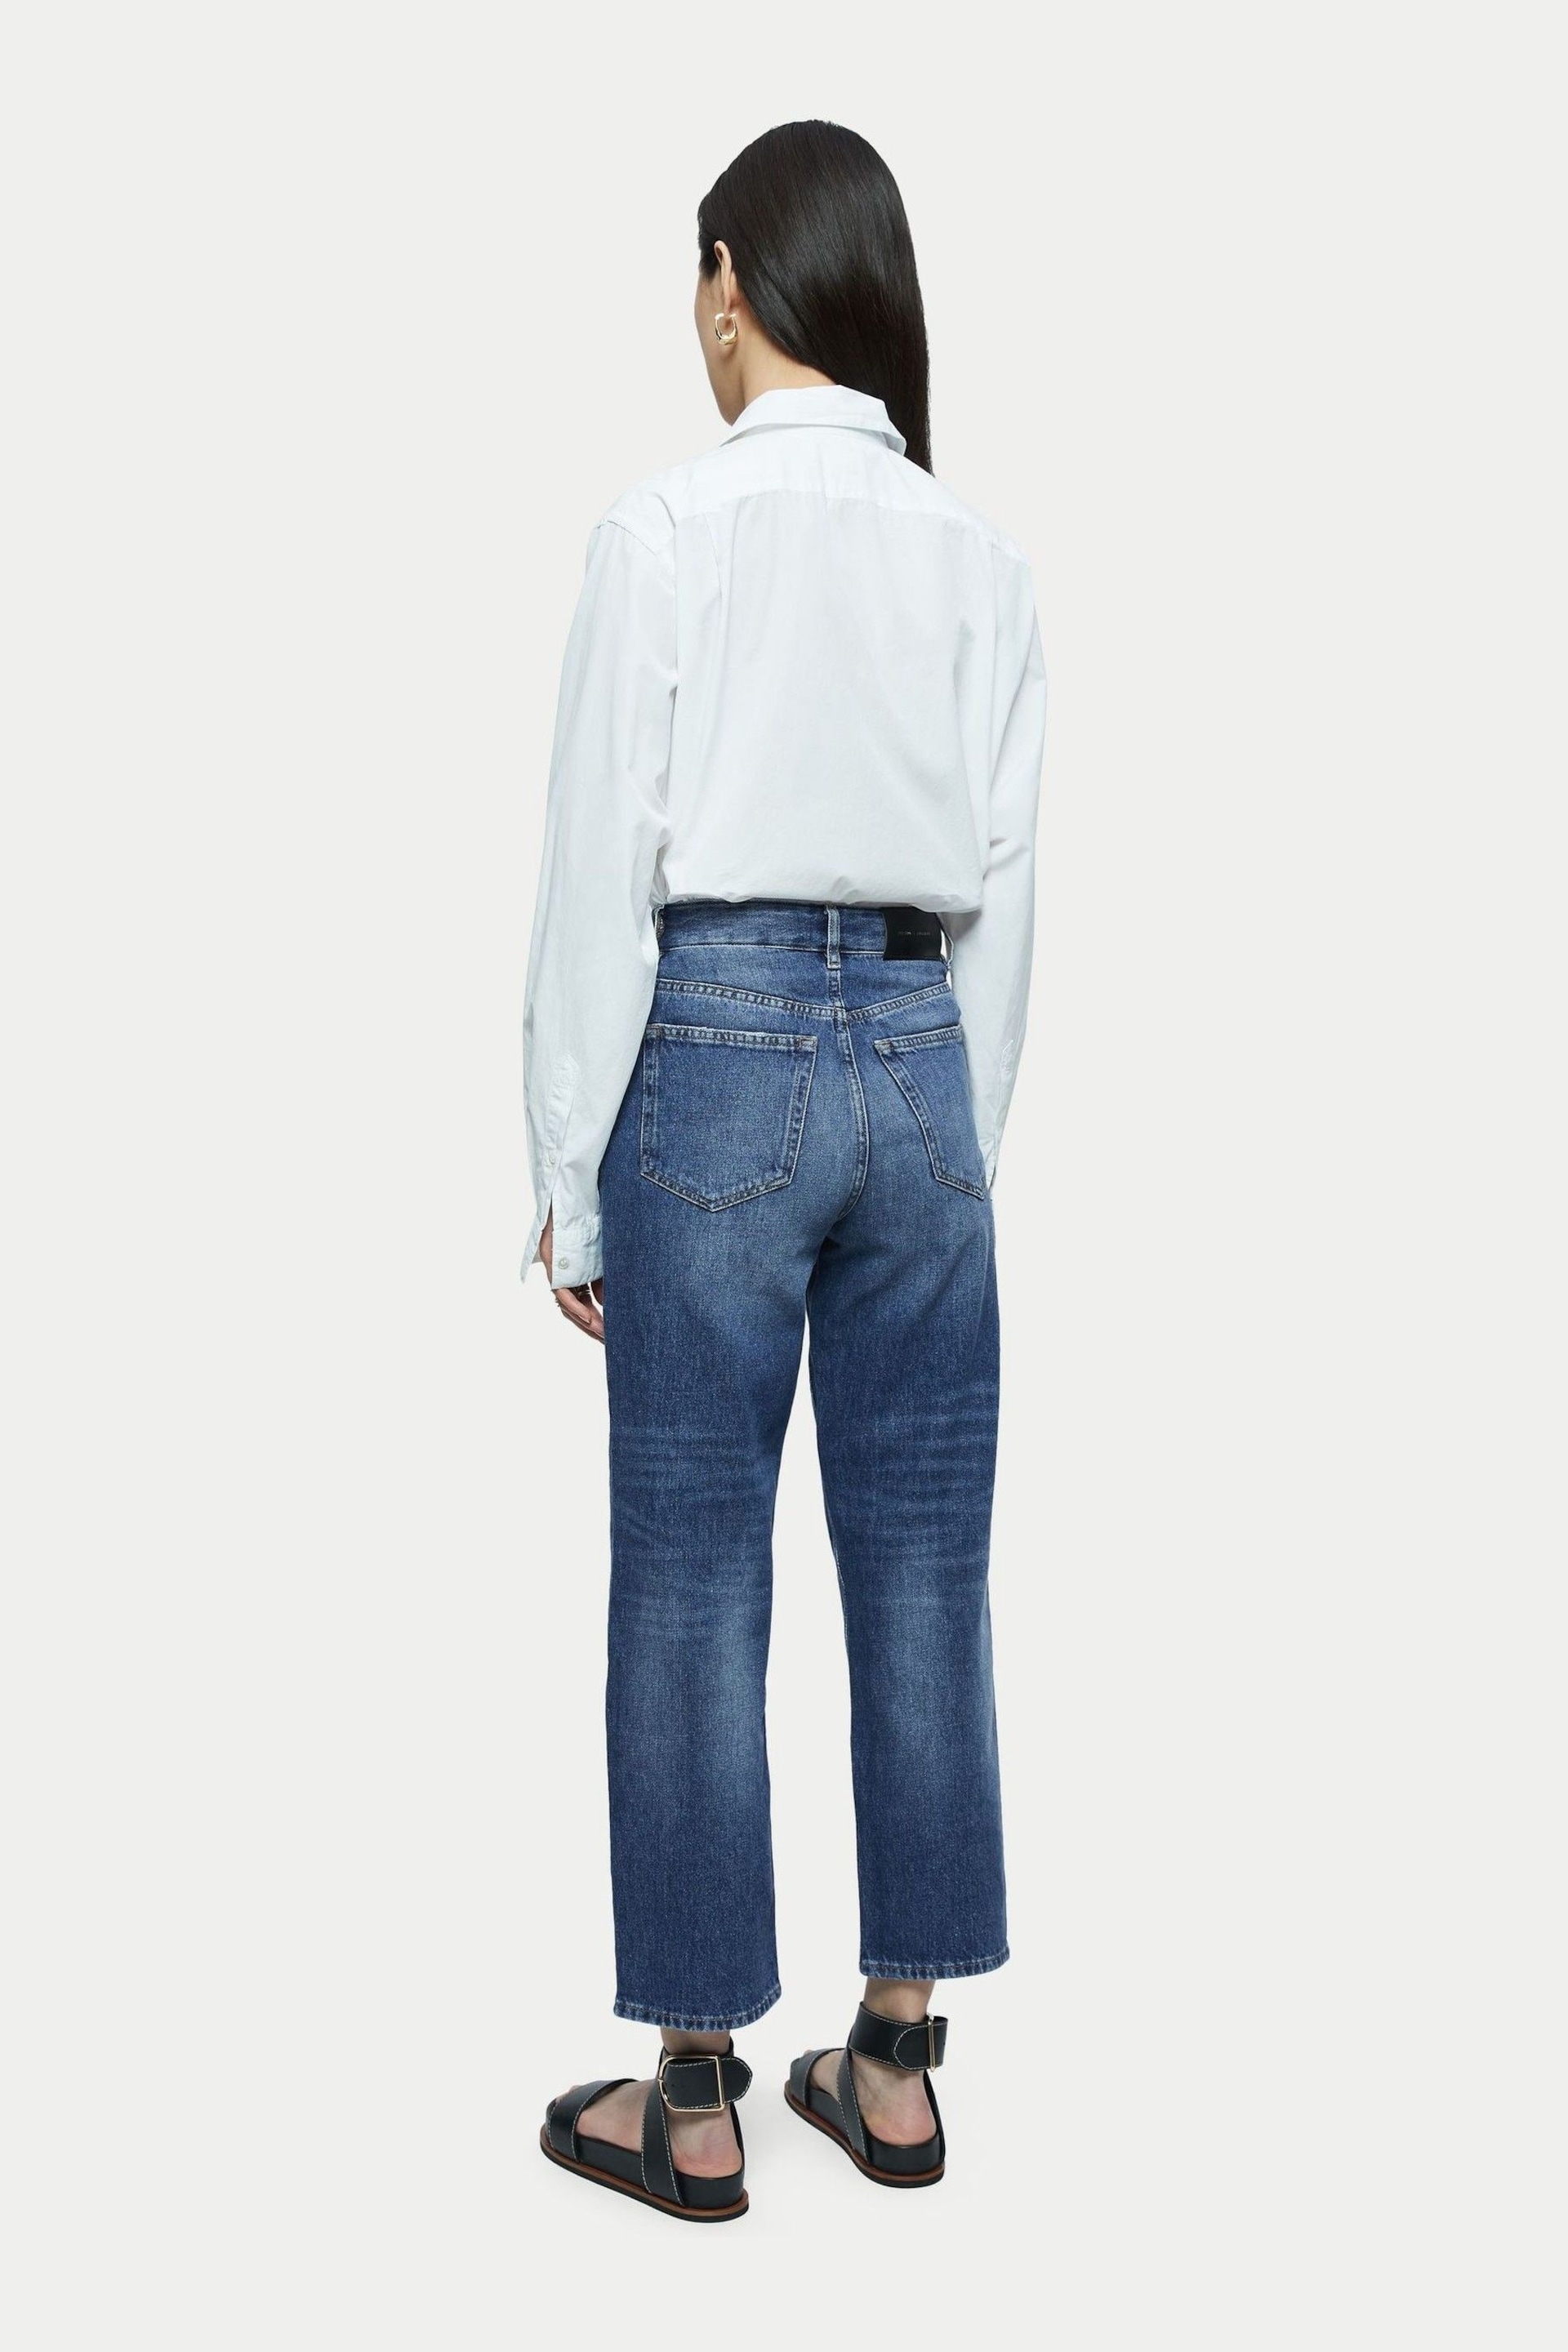 Jigsaw Blue Delmont Jeans - Image 3 of 5